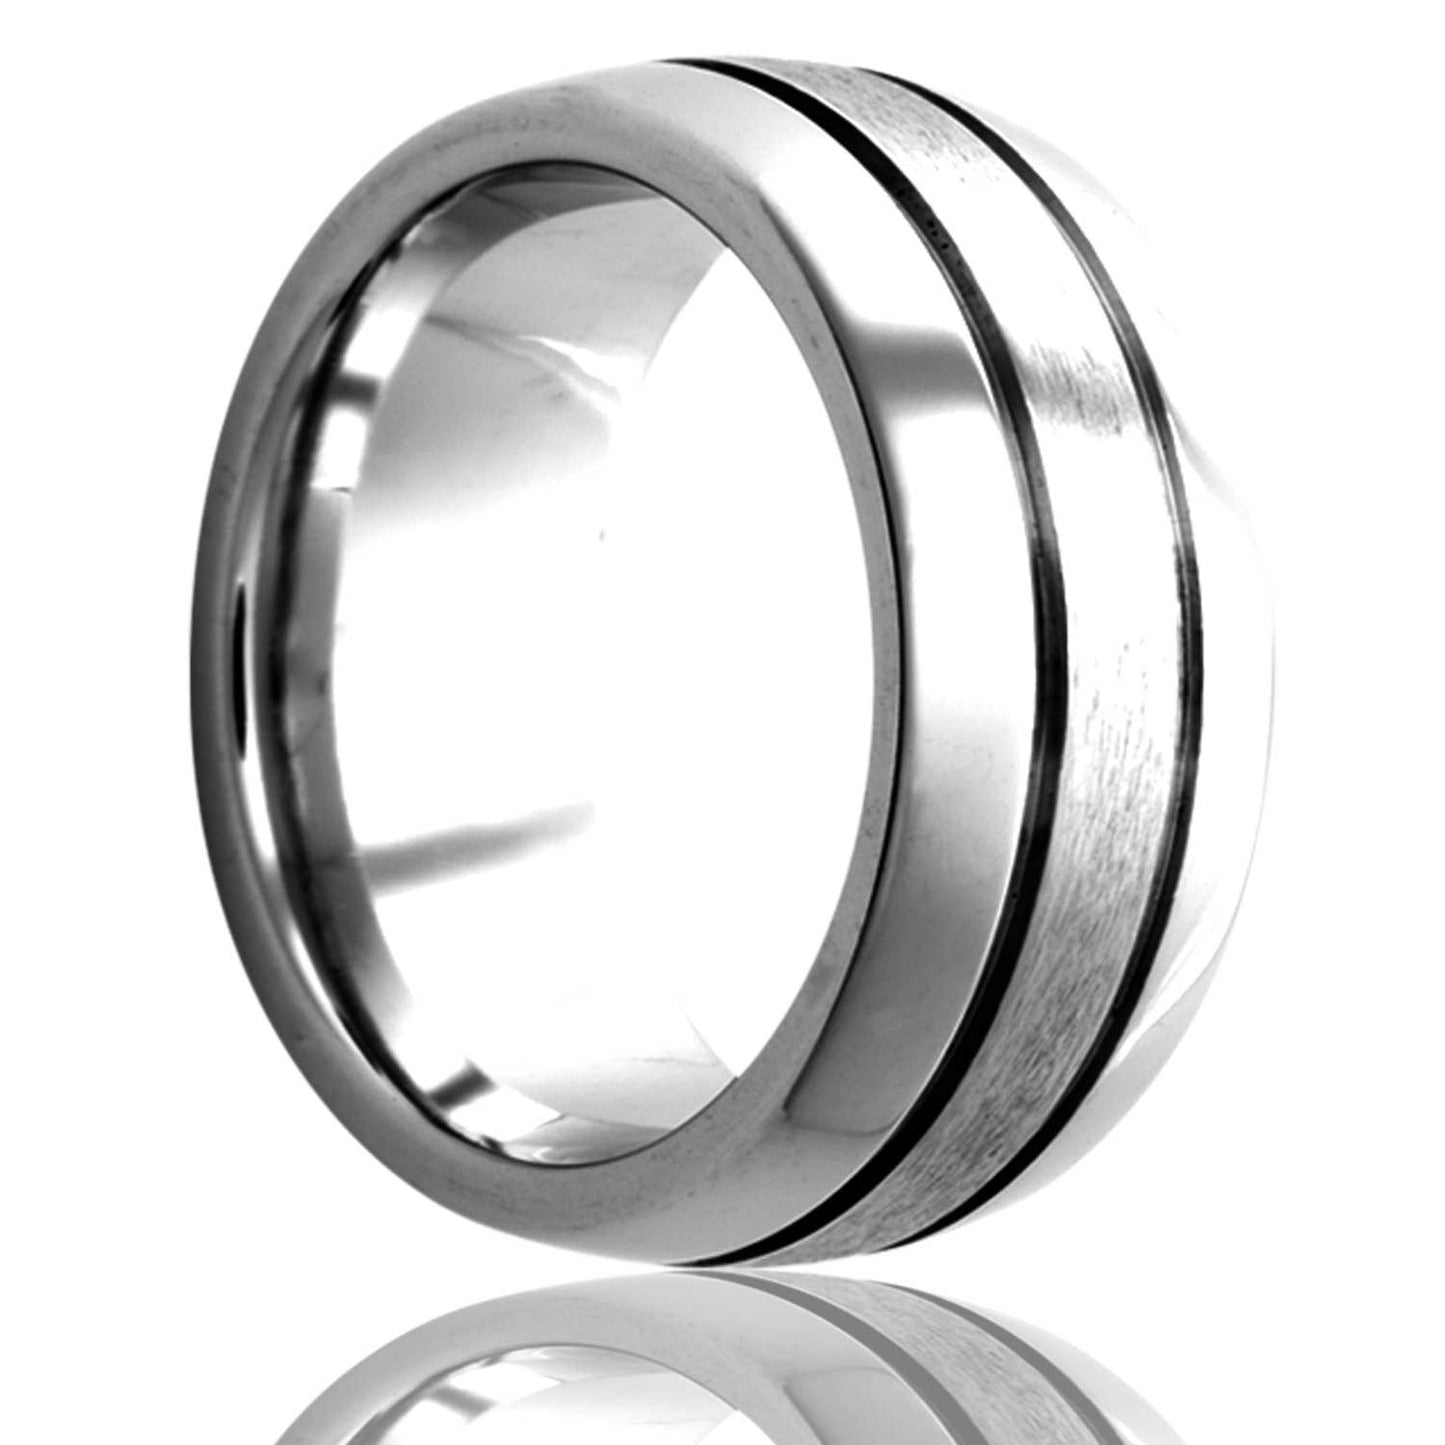 A domed satin finish grooved cobalt wedding band displayed on a neutral white background.